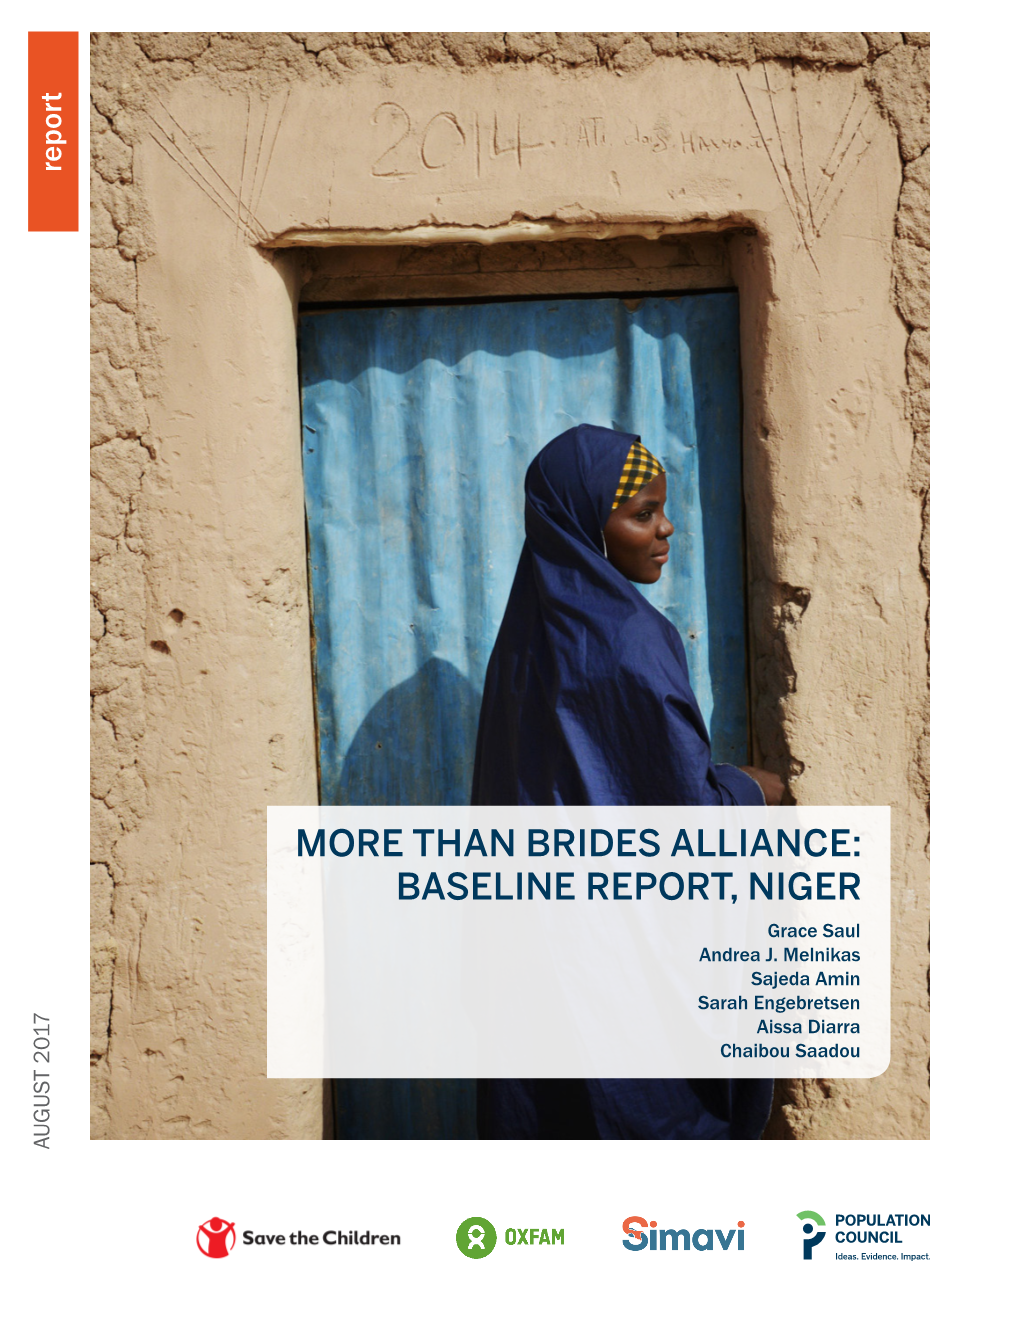 More Than Brides Alliance: Baseline Report, Niger.” New York: Population Council